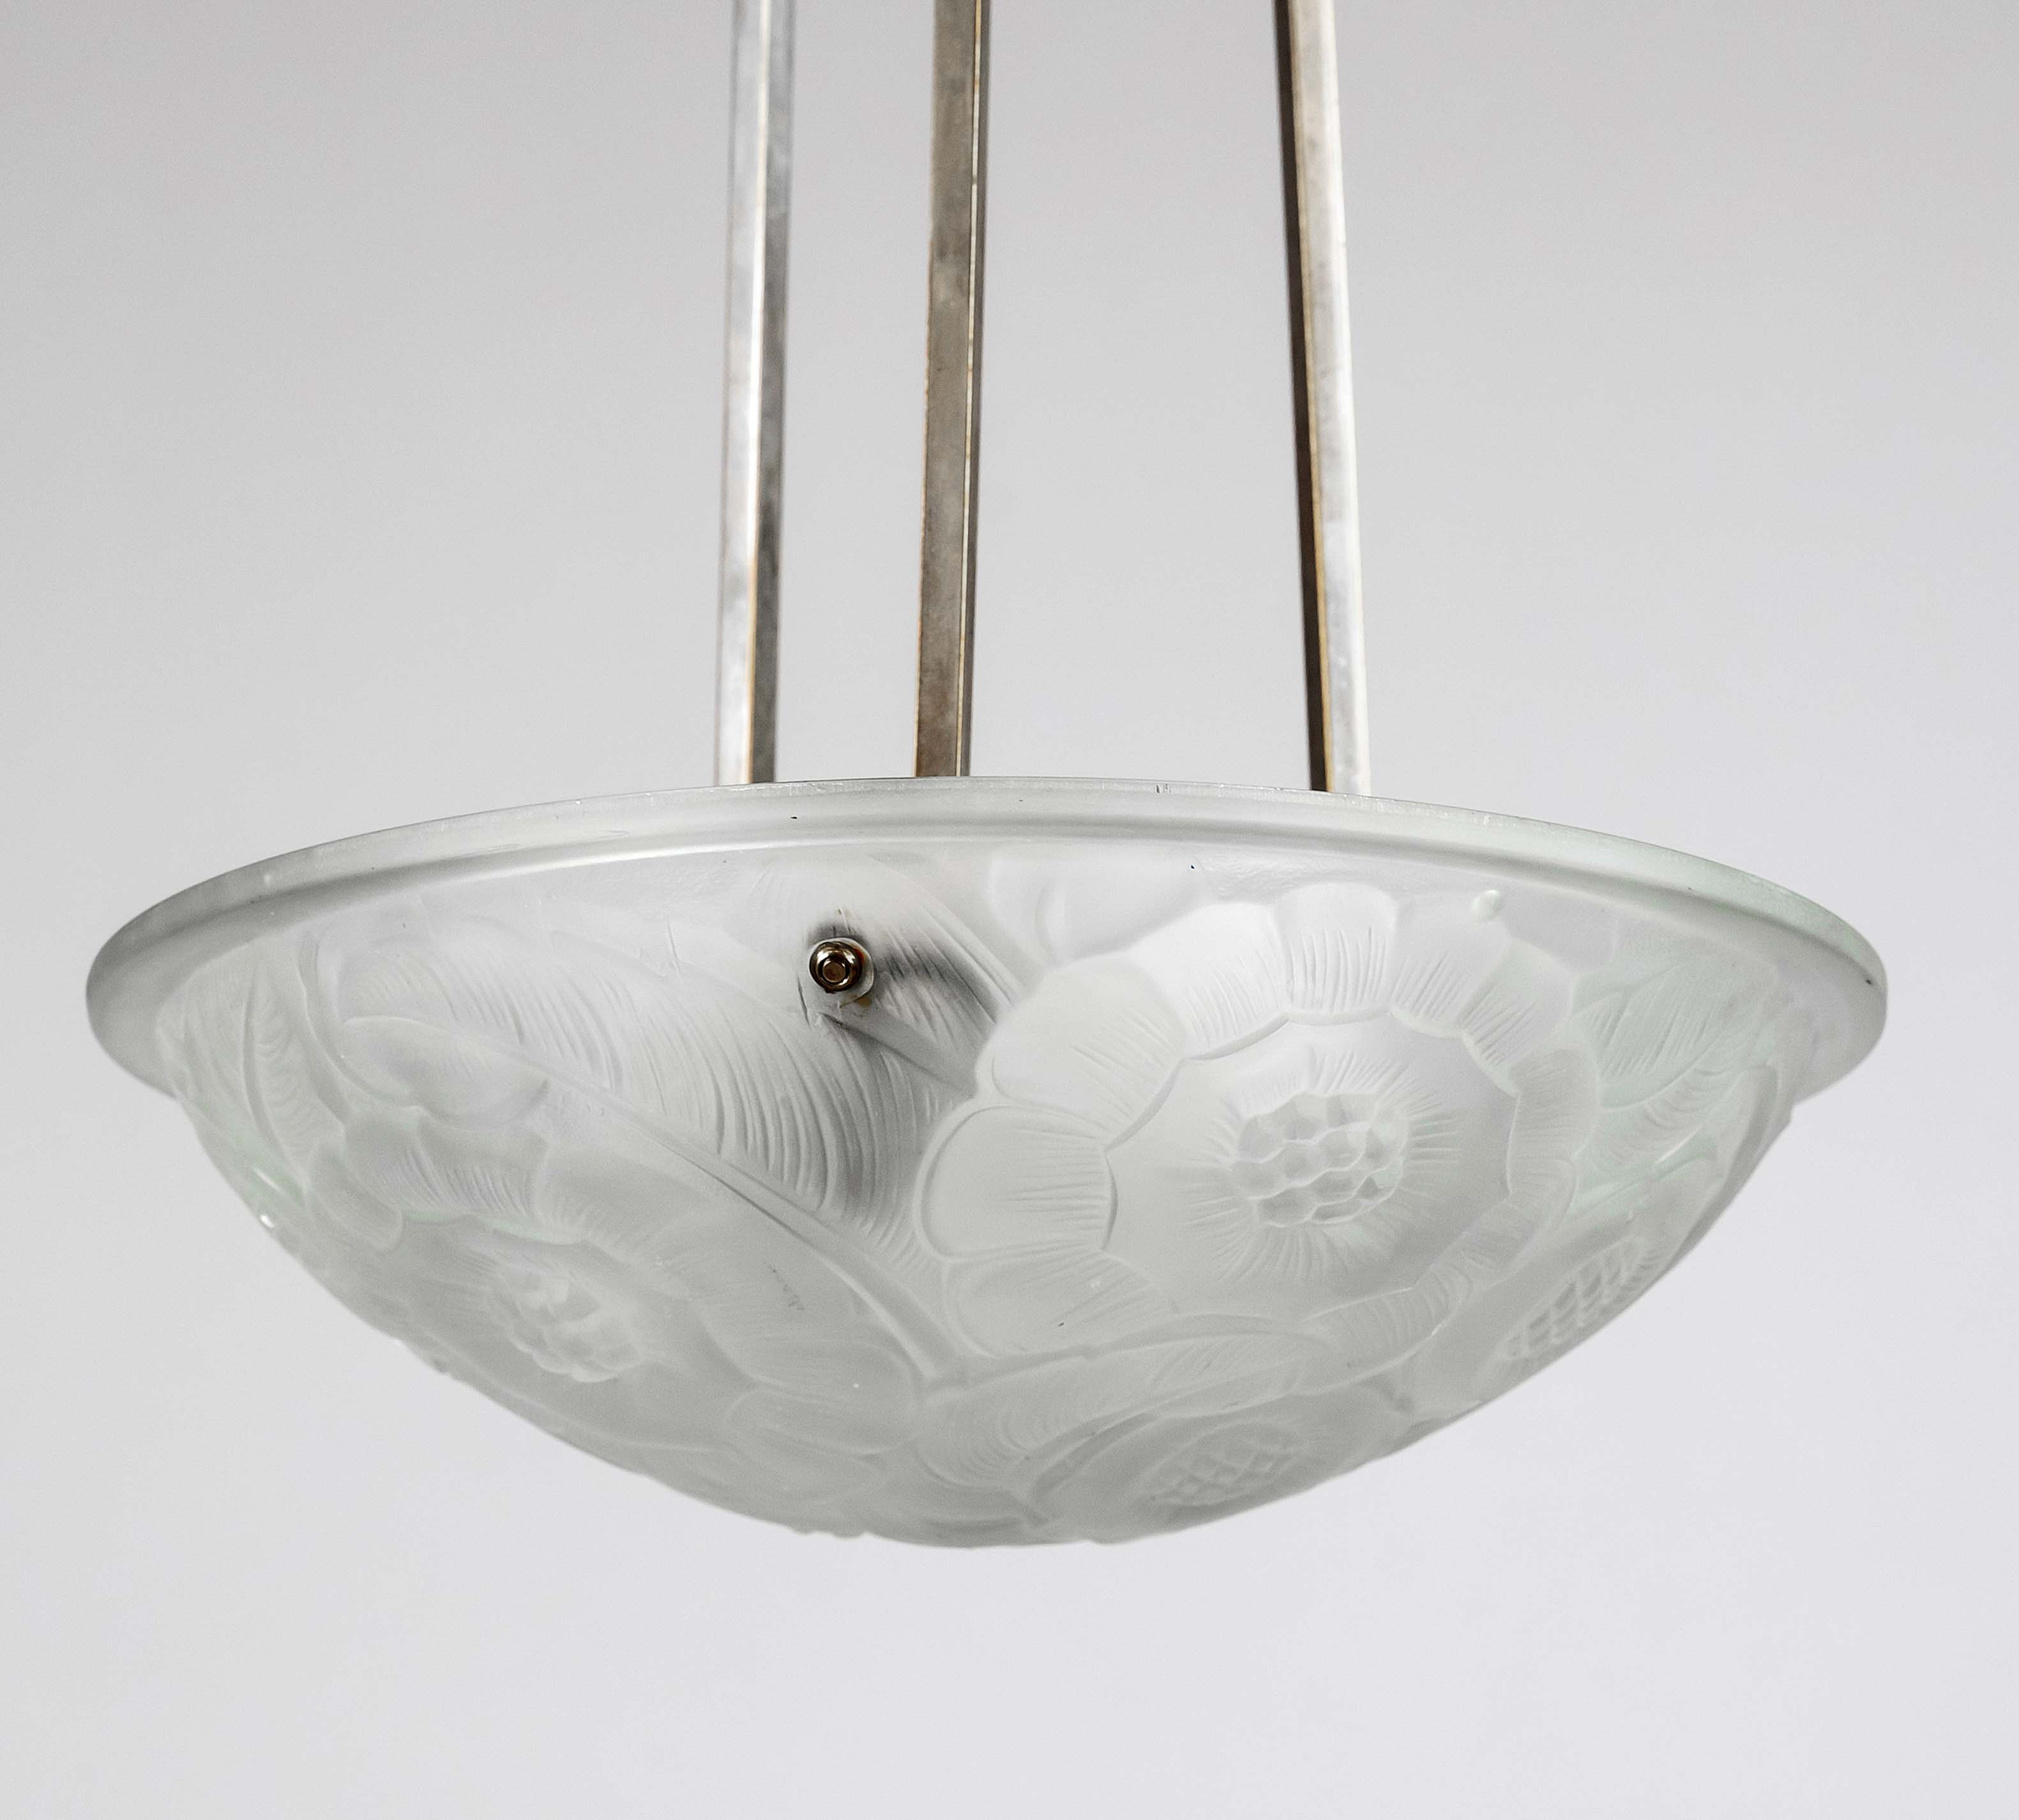 Art deco ceiling lamp, 1930s. Three-piece chromium-plated frame with ornamented ceiling part. Etched